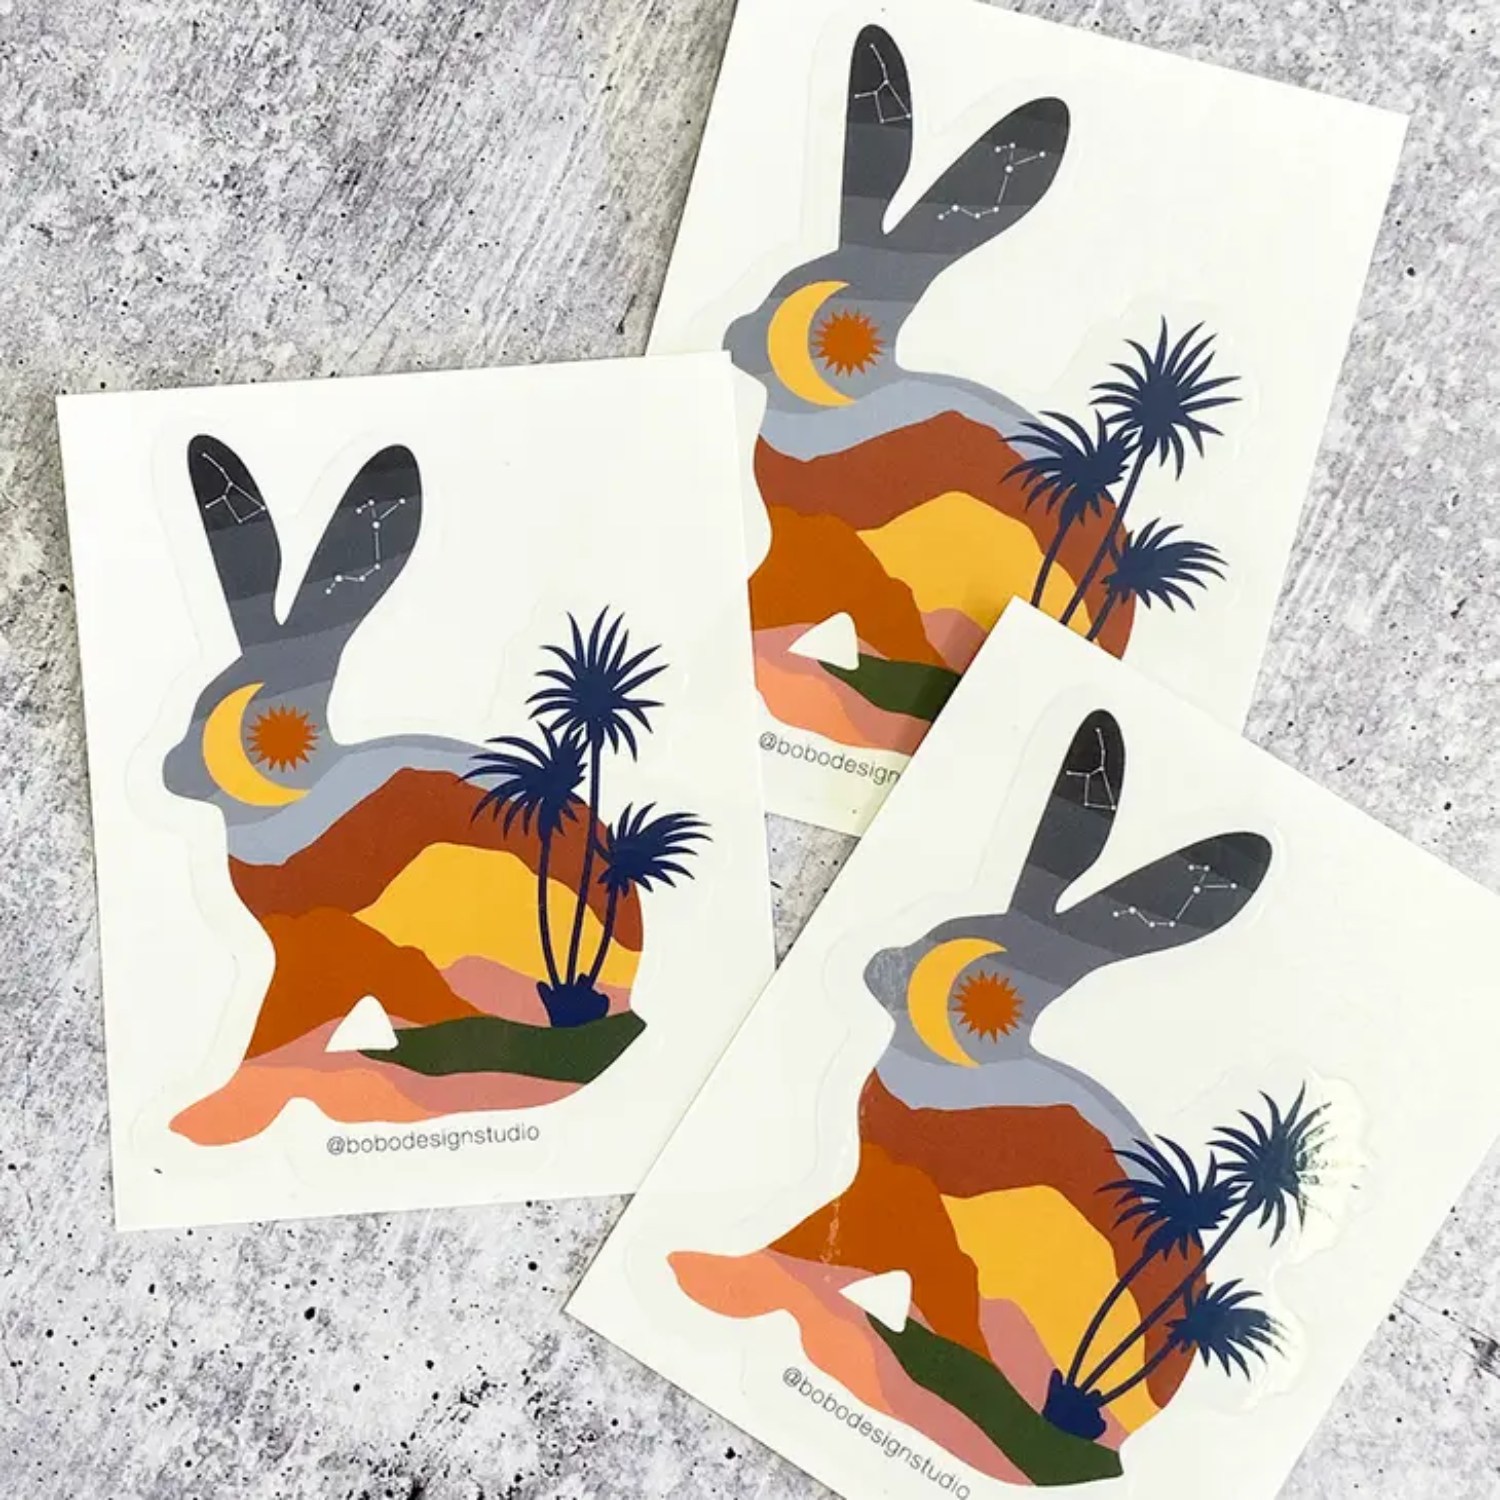 Three bunny stickers on white backing paper